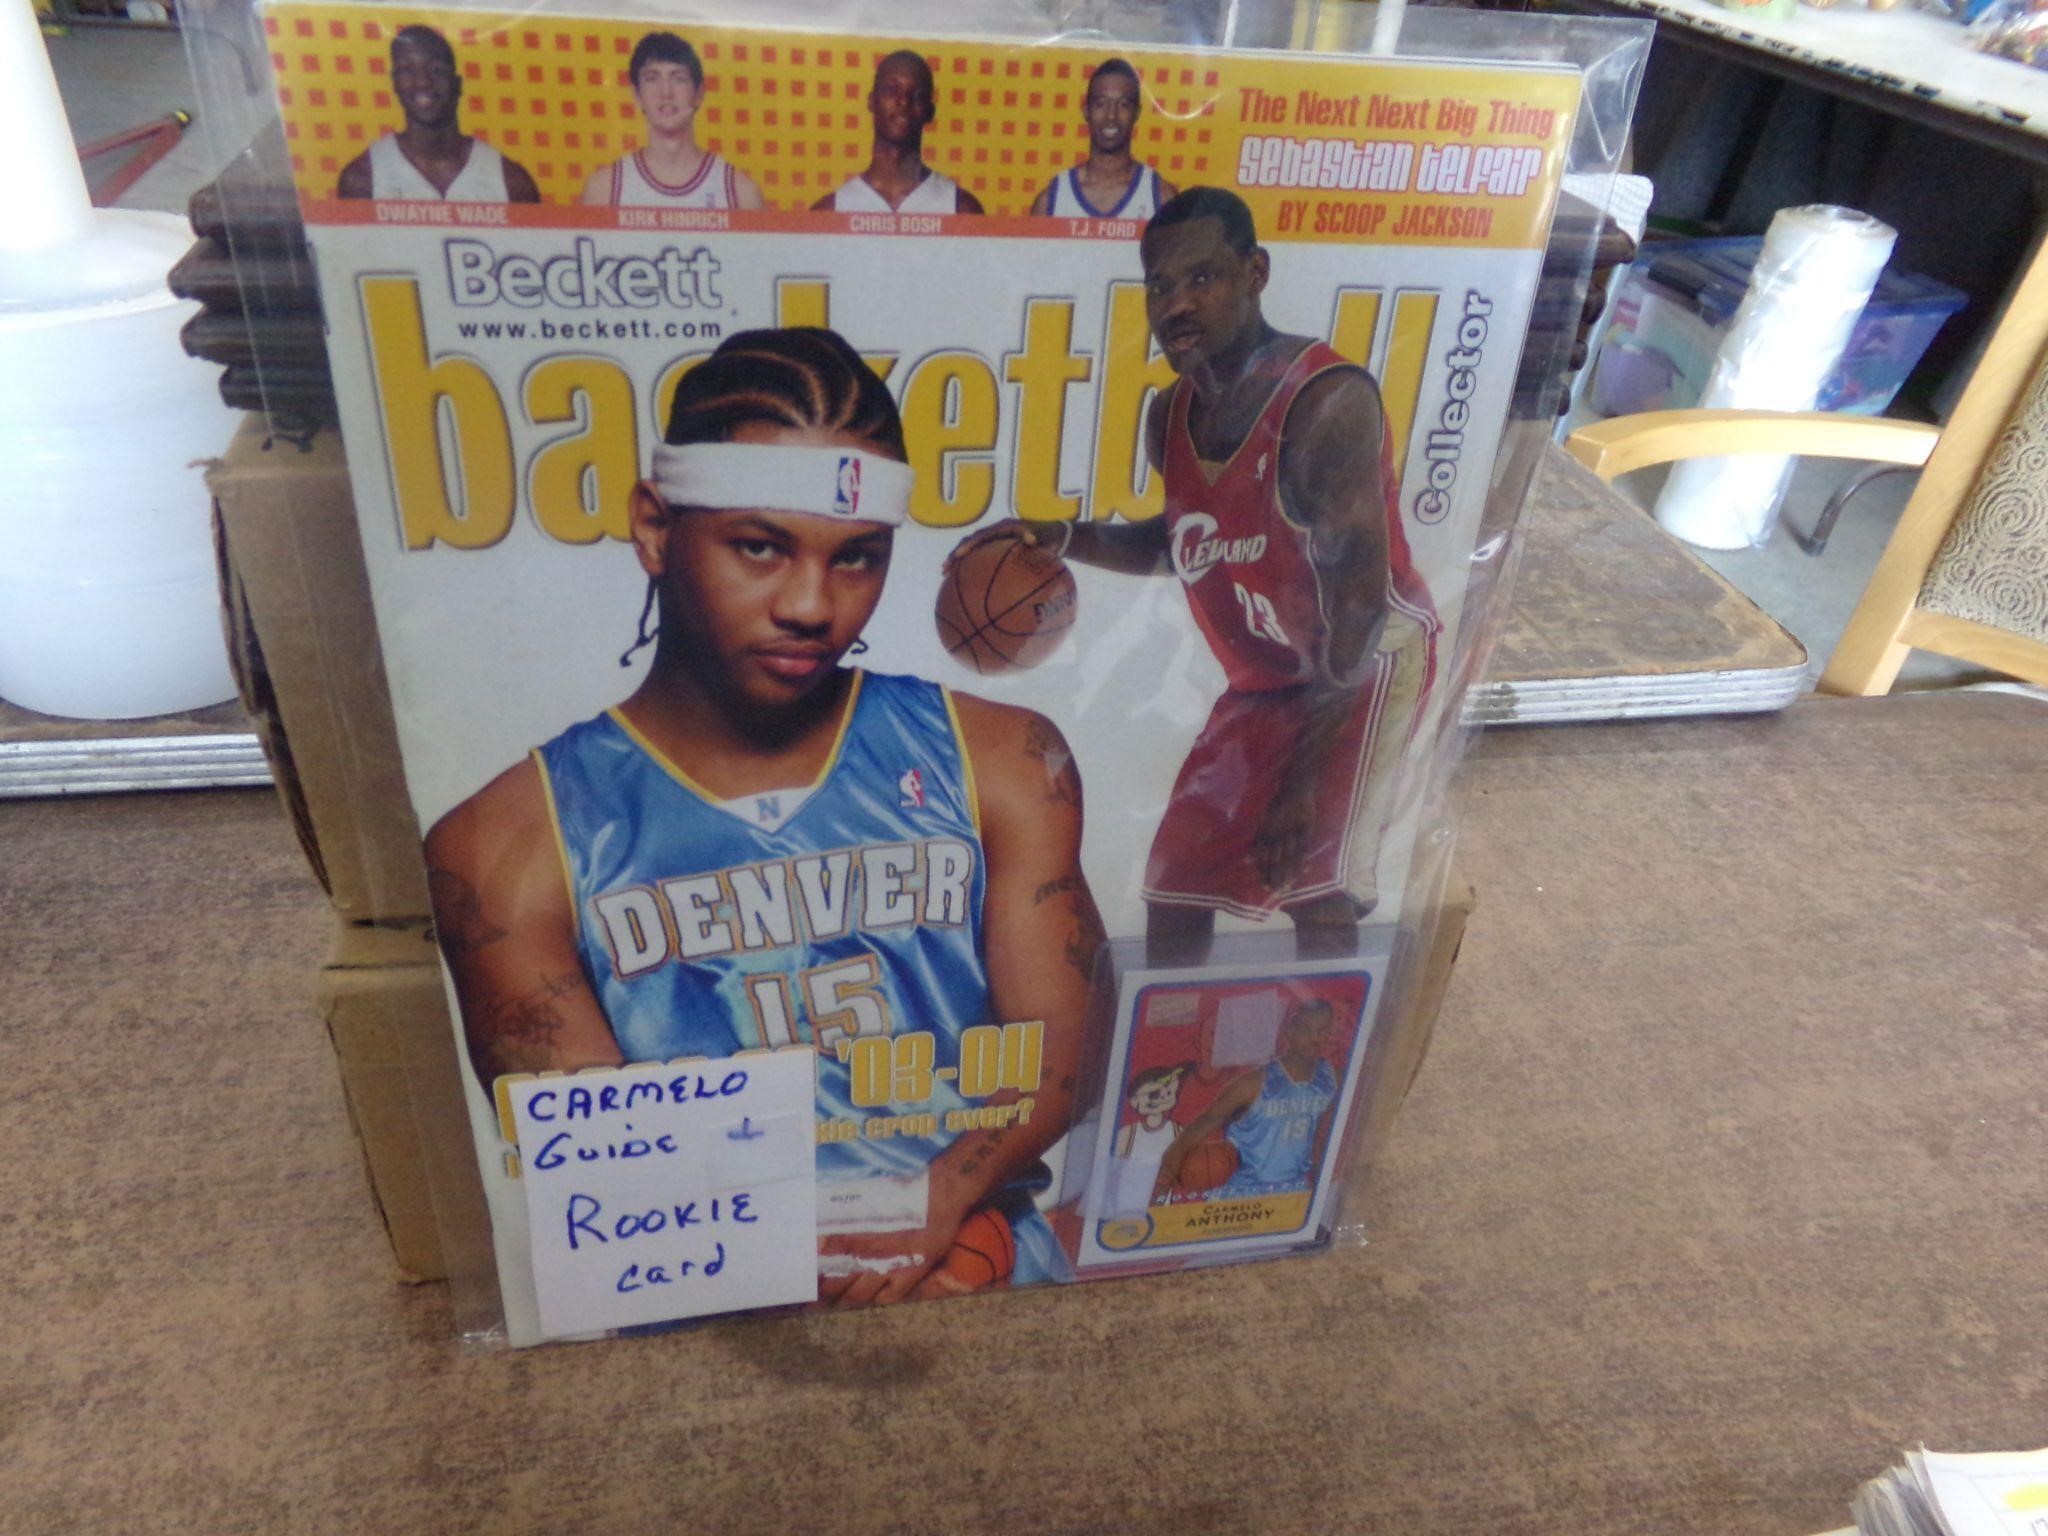 Carmelo Becket and rookie card